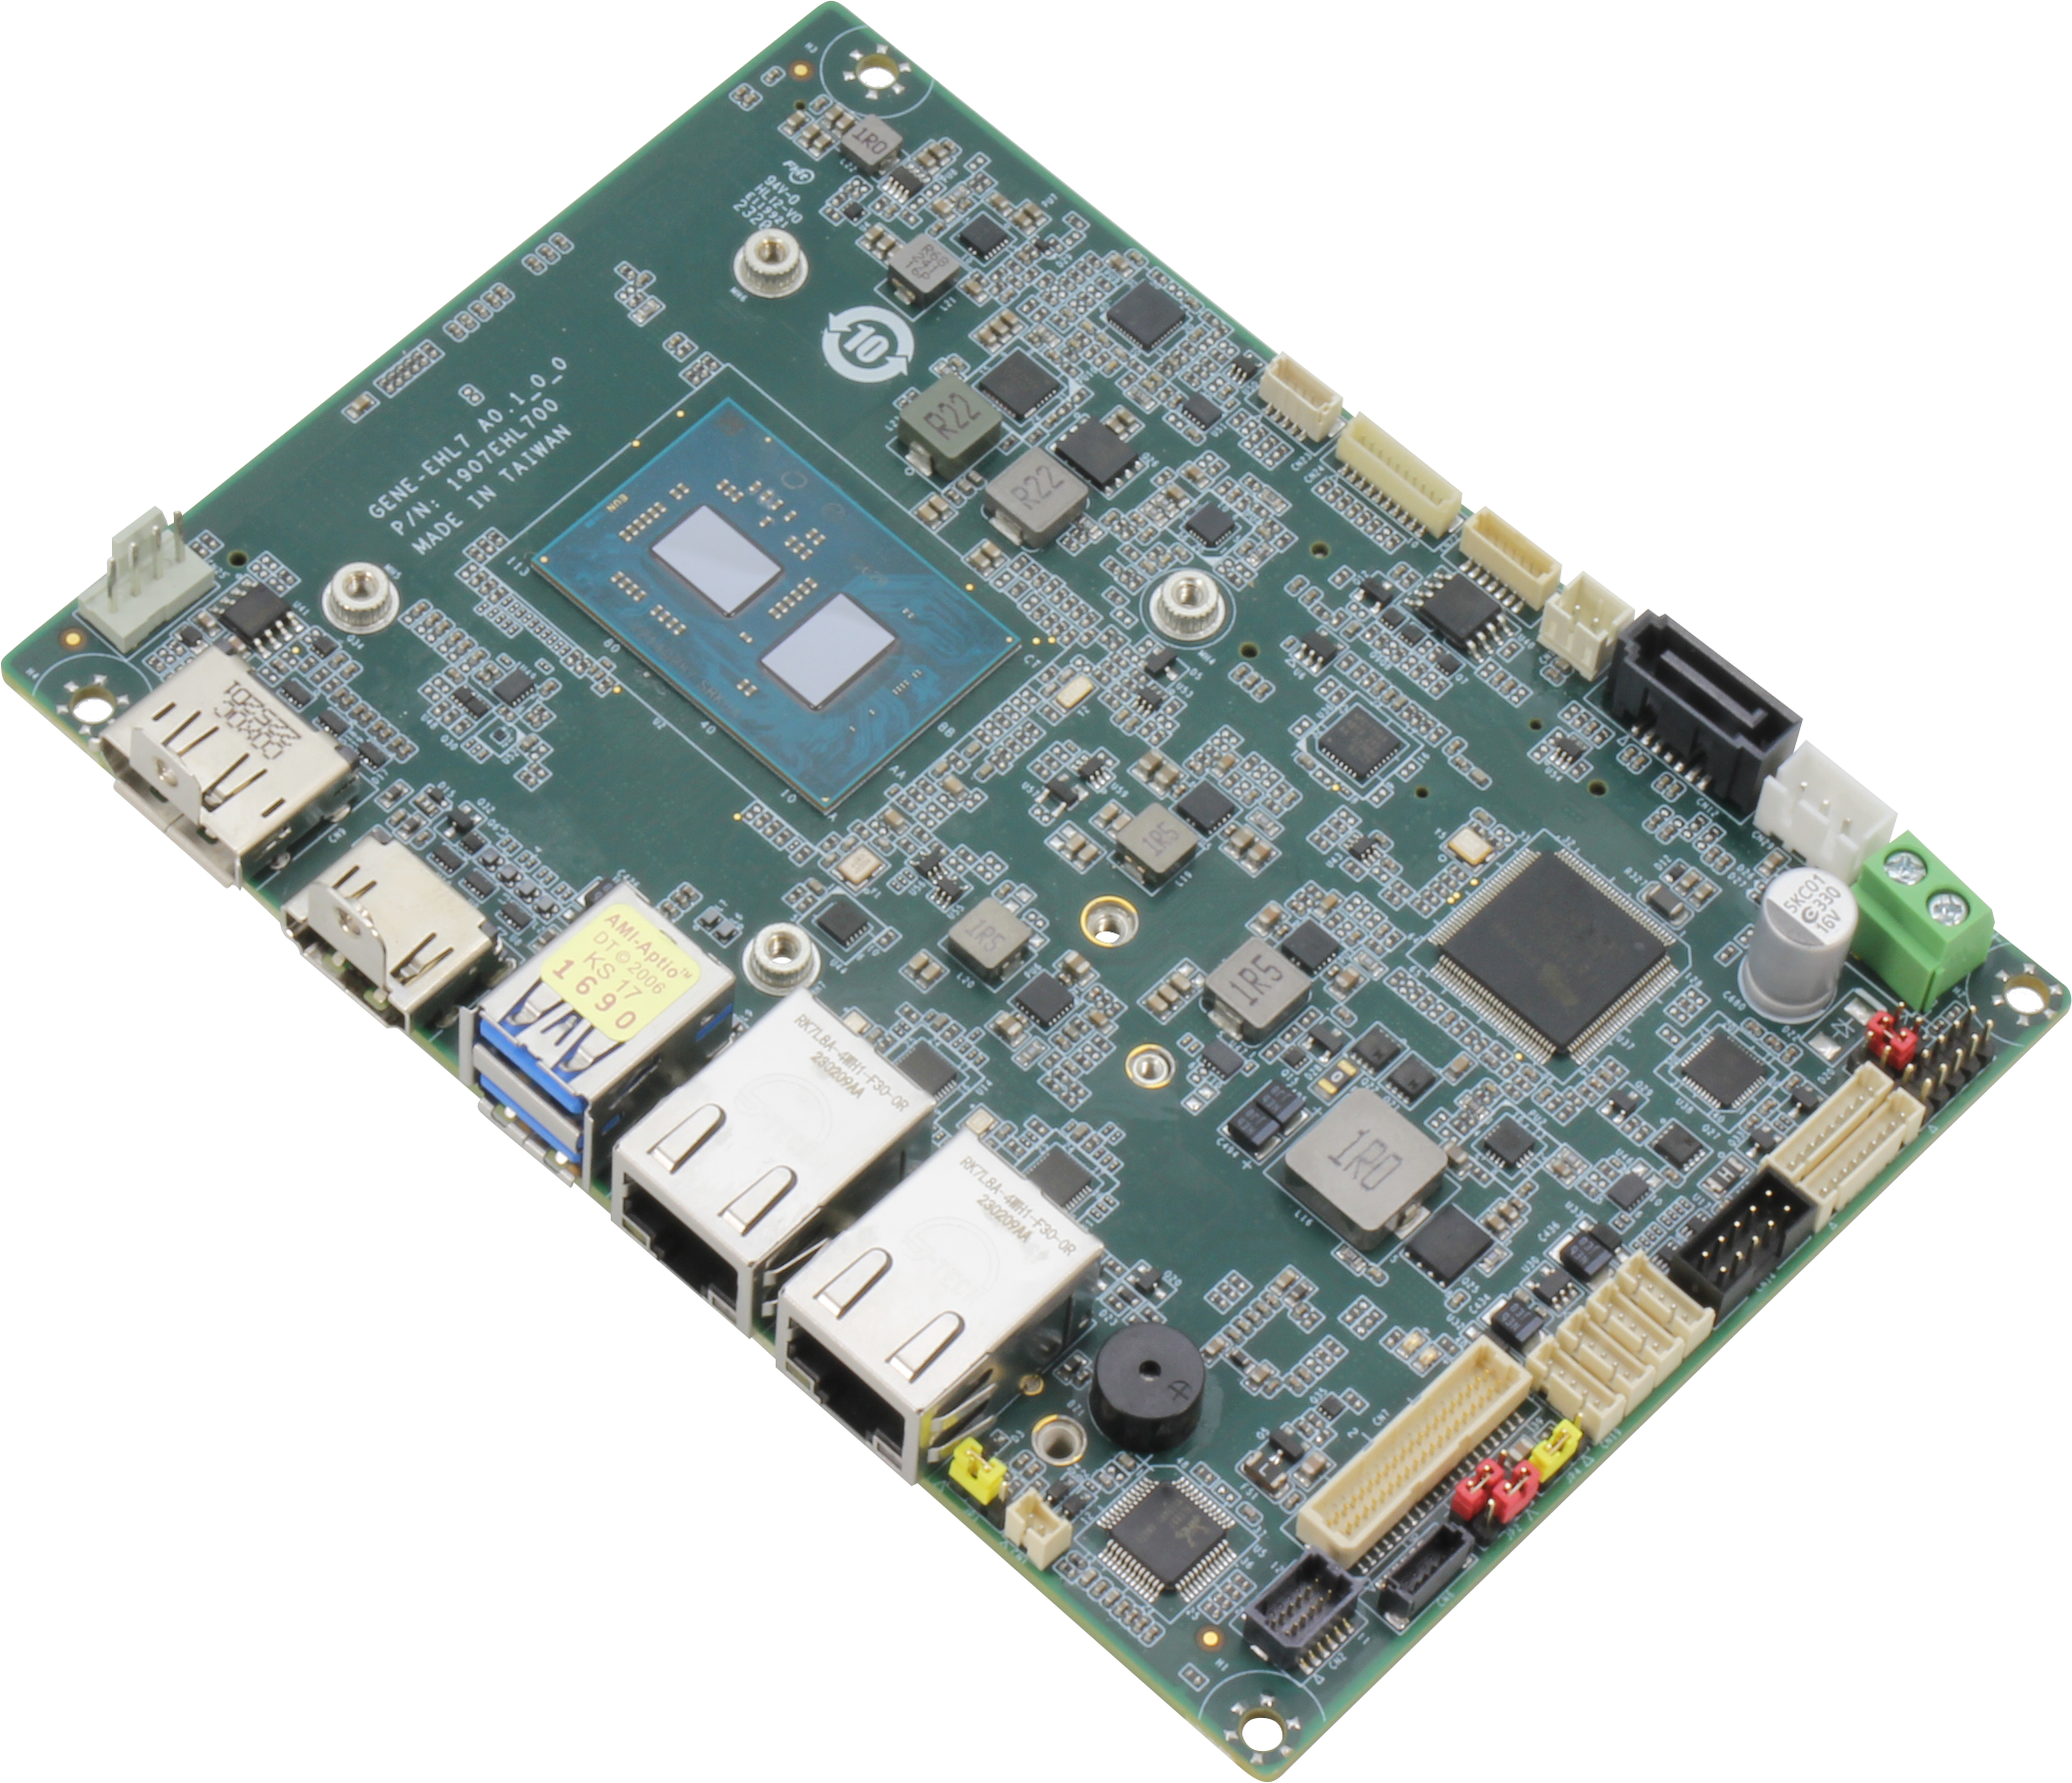 AAEON Launch the GENE-EHL7, an Efficient 3.5” SBC for Smart City, Industrial Automation etc